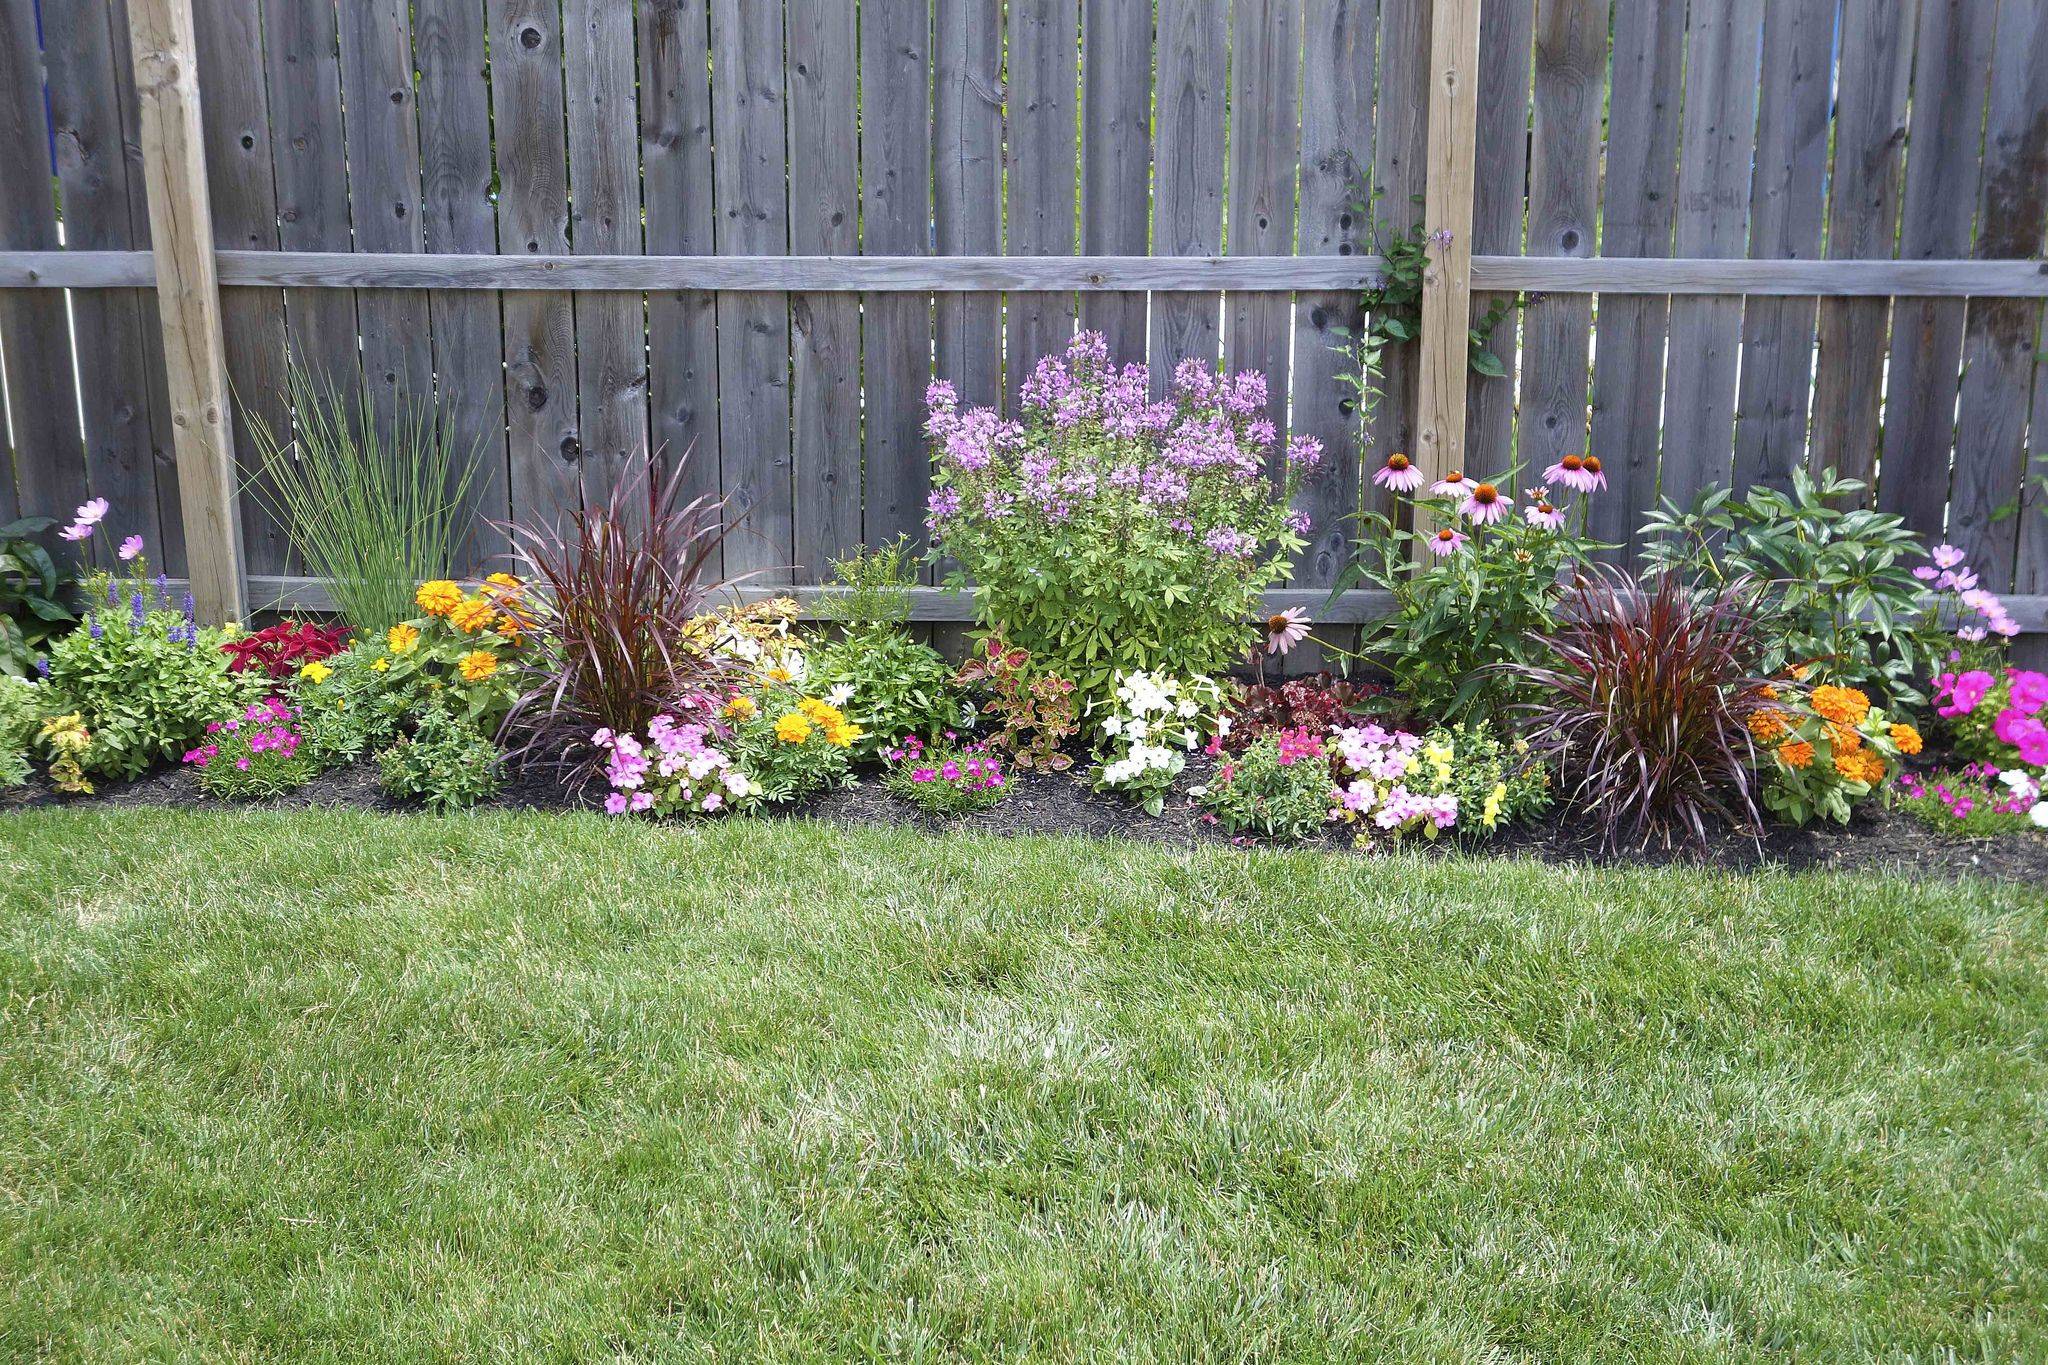 Marvelous Incredible Flower Beds Ideas